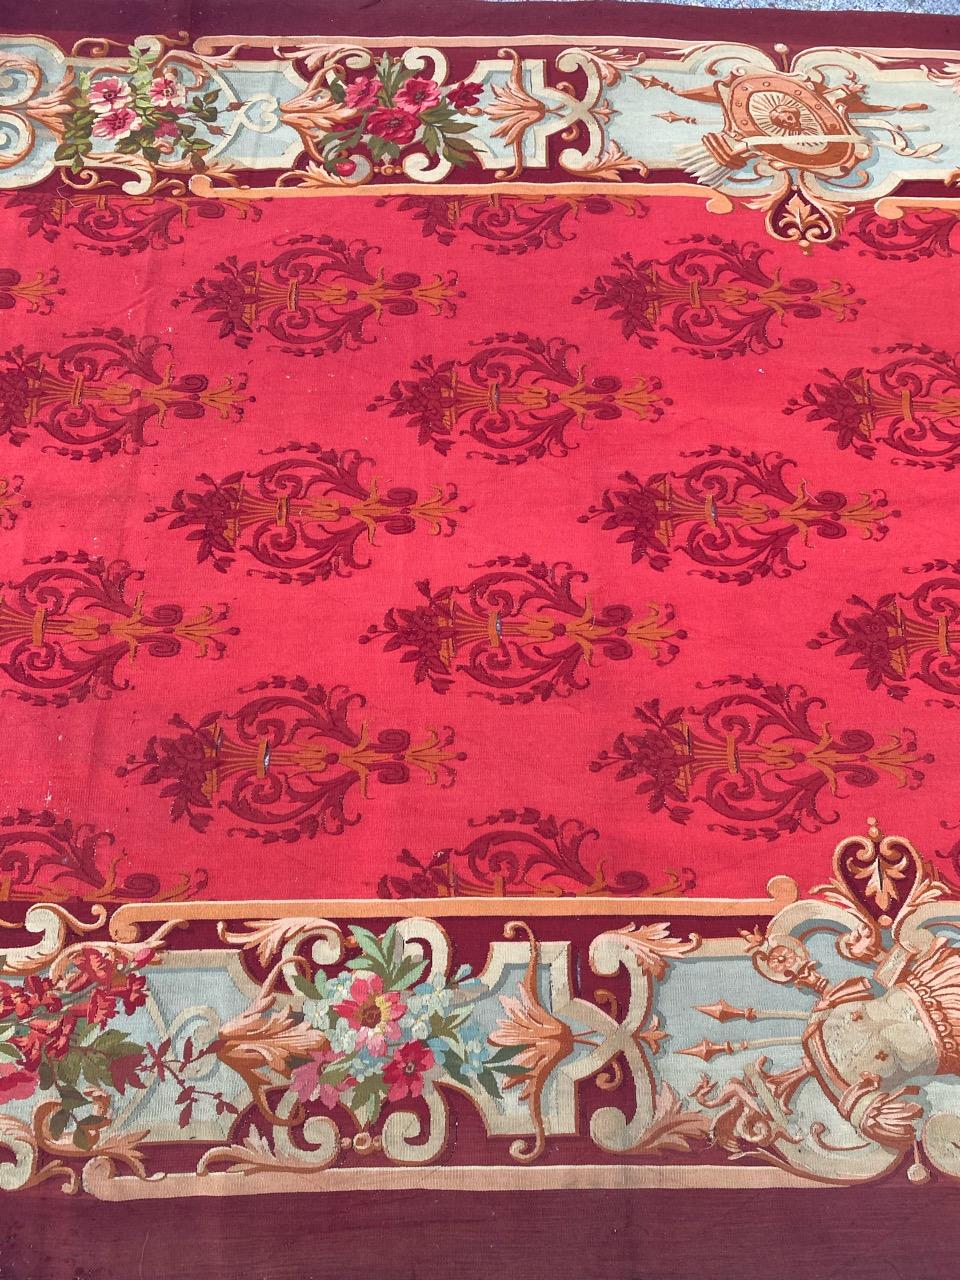 19th Century Wonderful Luxurious Antique Napoleon the Third Aubusson Tapestry Runner Rug For Sale